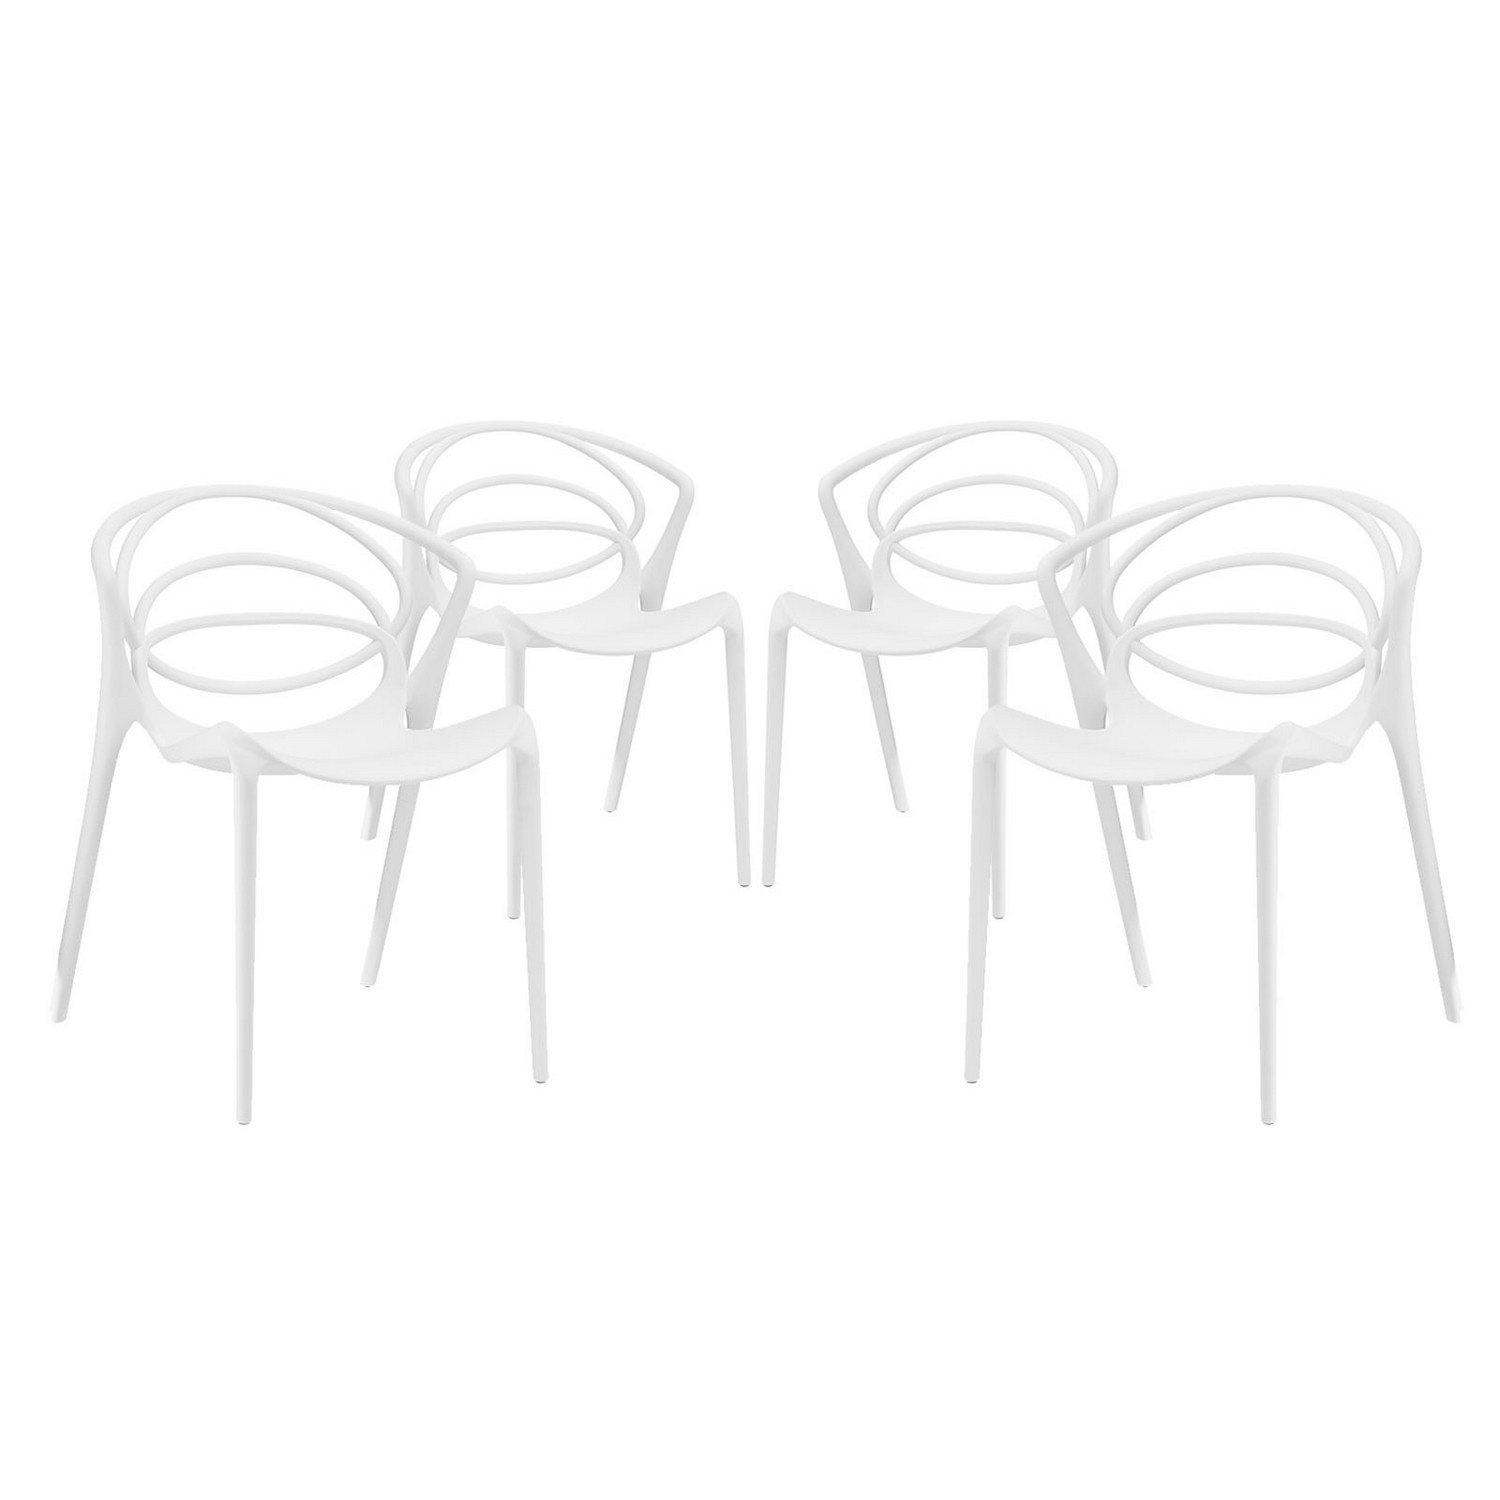 Modway Locus Dining Chair - Set of 4 - White